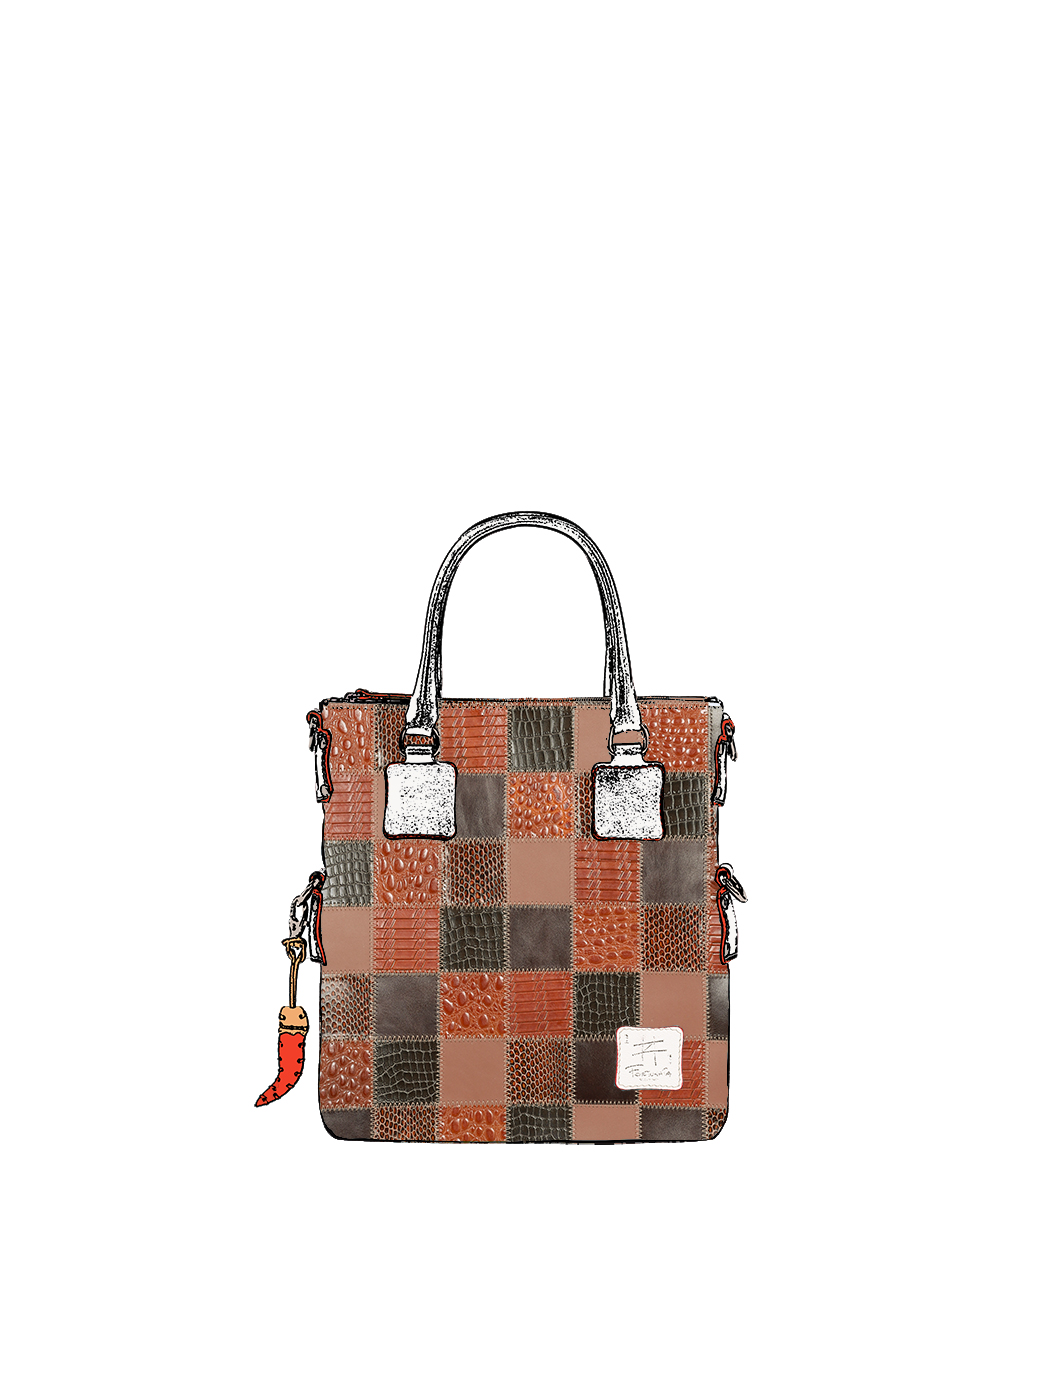 Mini Me Bag Leather Patchwork Tote Collection